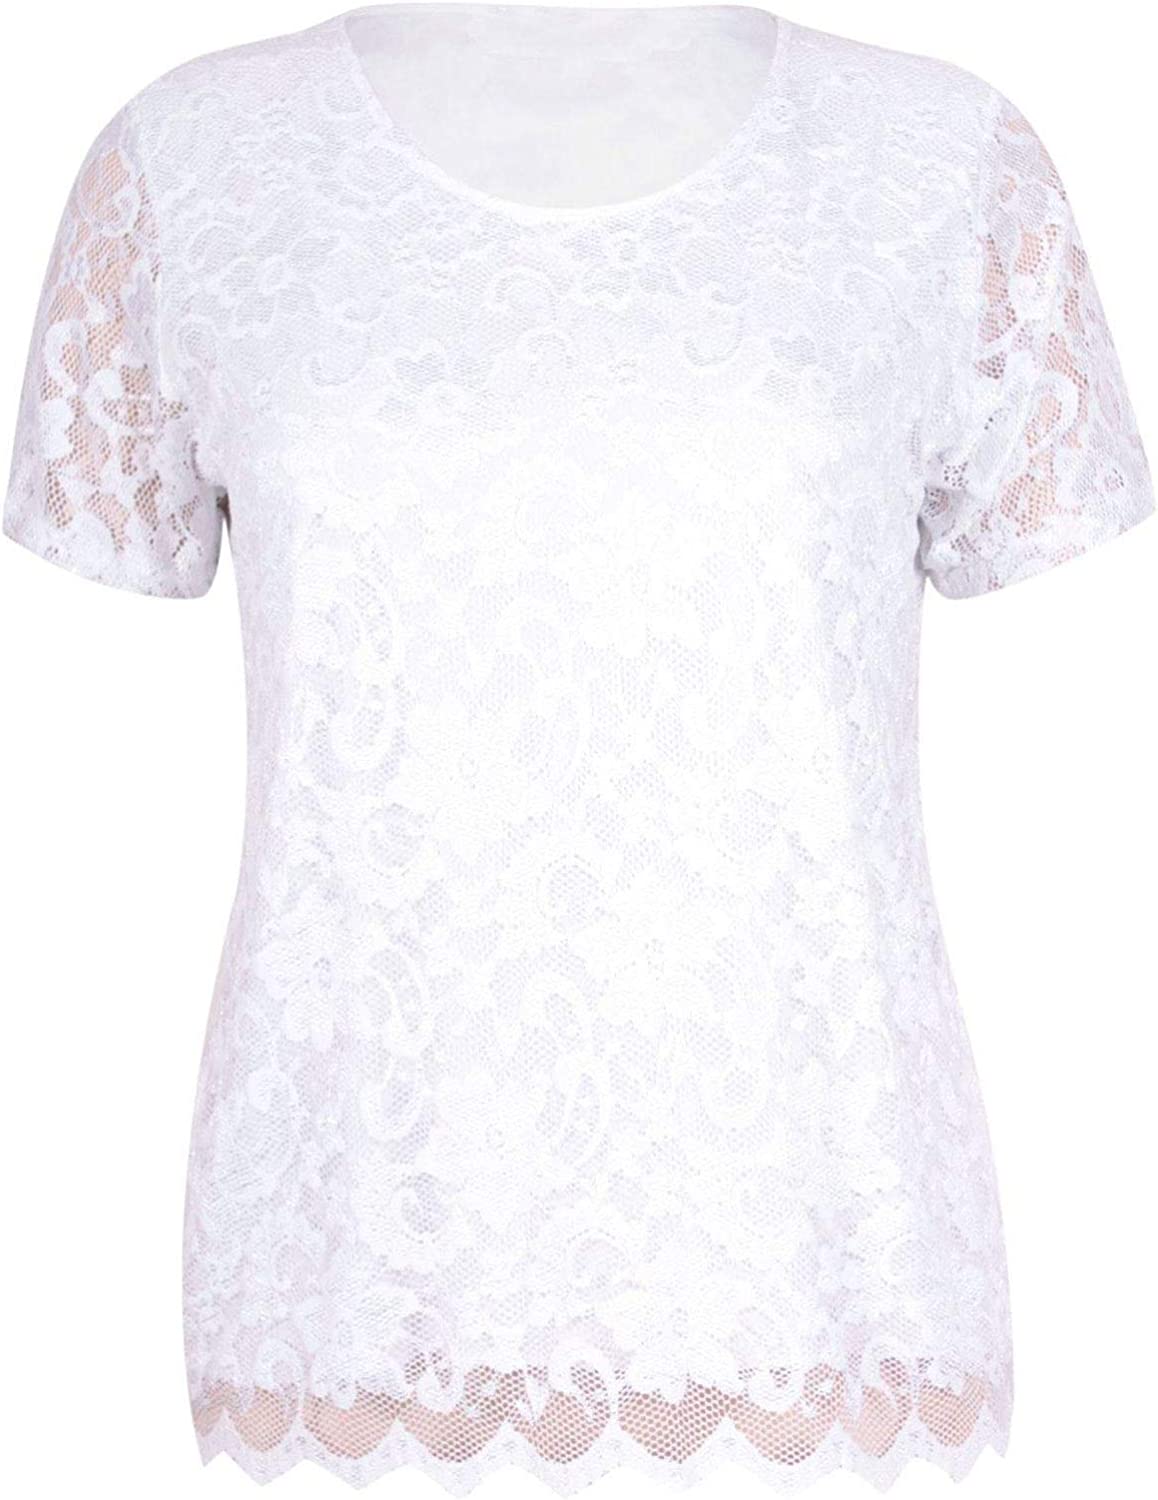 Ladies Short Sleeve Floral Lace Blouse Womens Fancy Stretchy Party T Shirt Top